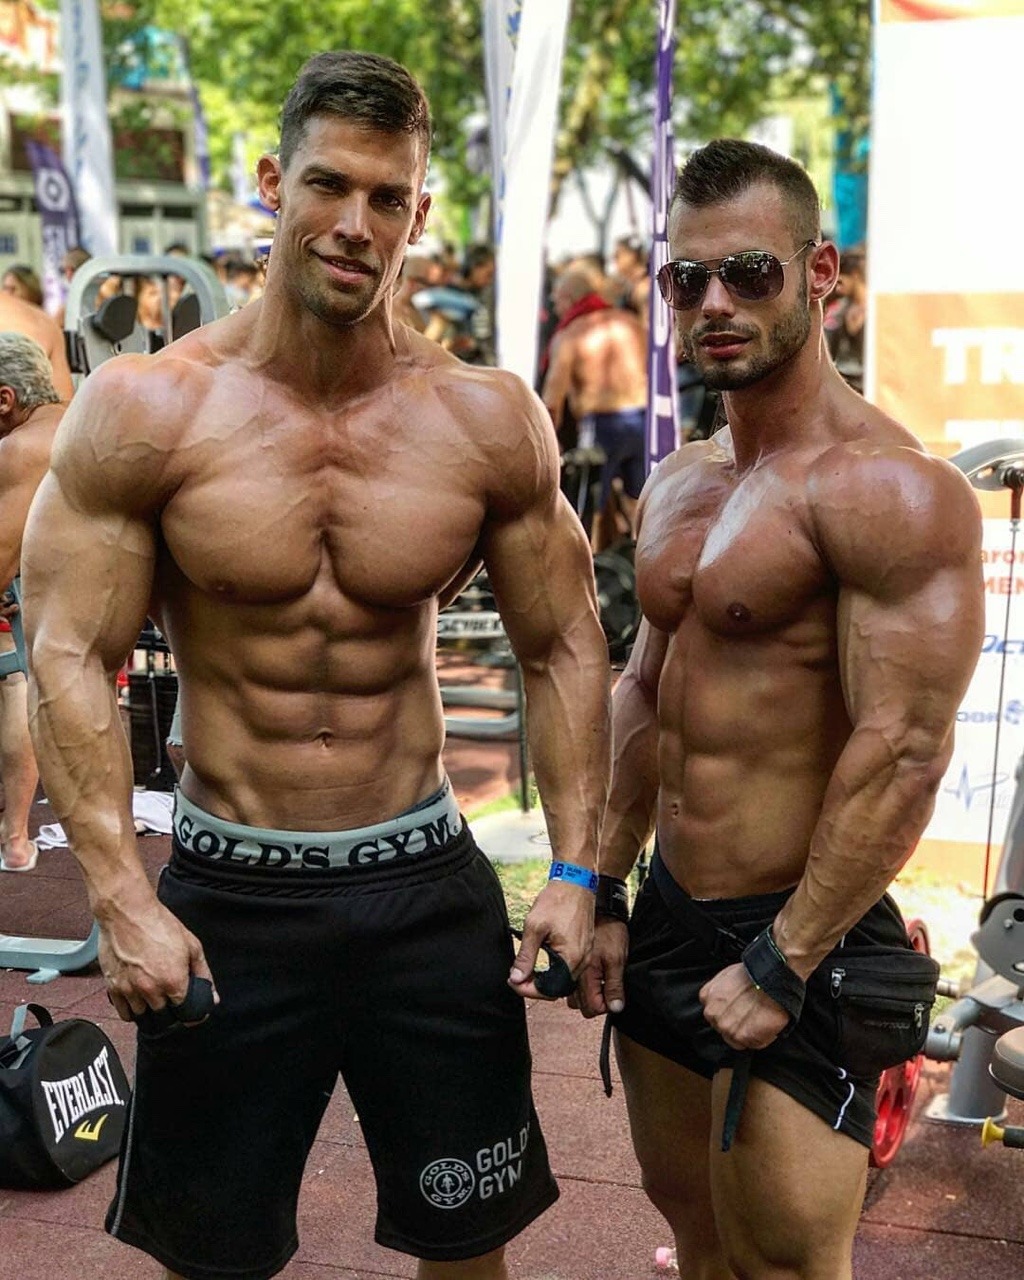 Muscle Male Porn Stars - Muscle â€” Yet another gay porn star turned bodybuilder. I...